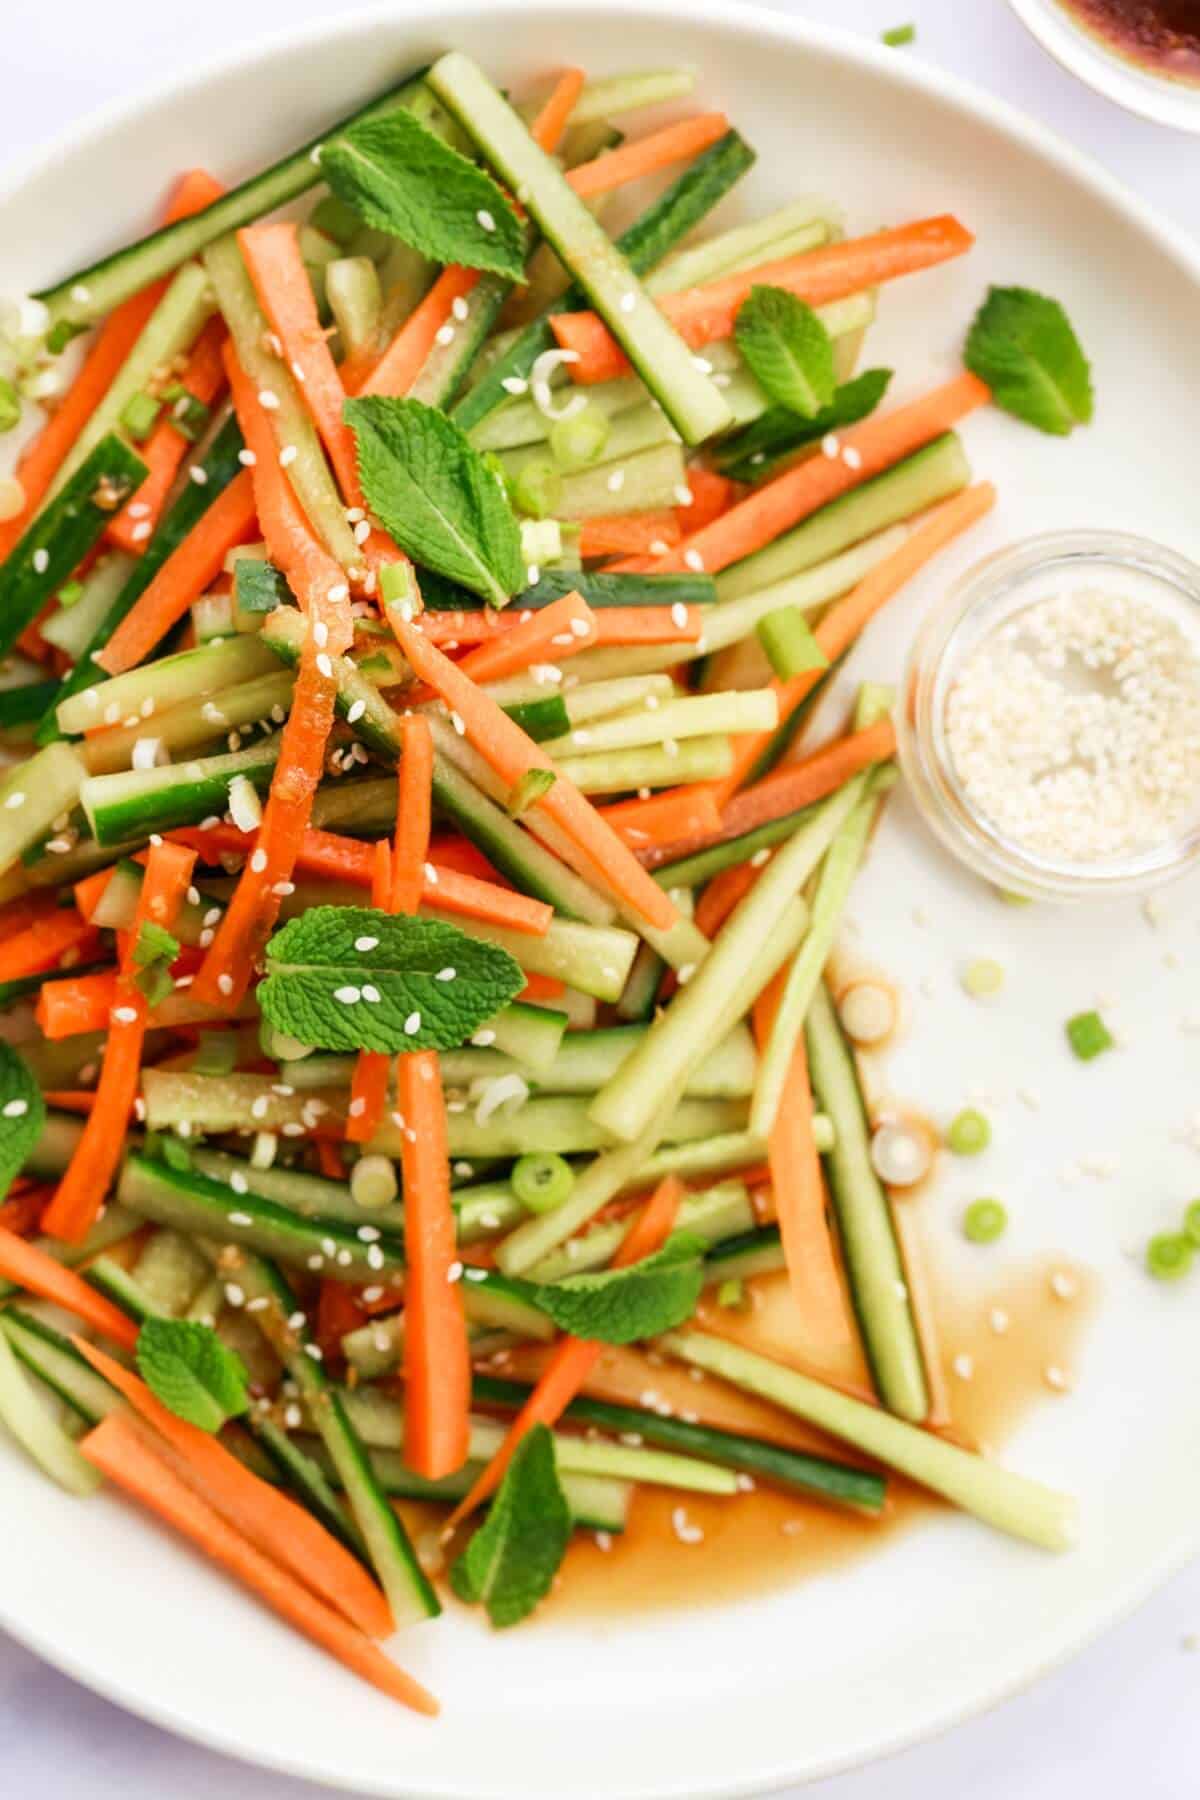 A plate of small carrot and cucumber sticks topped with fresh herbs, green onion and a tiny bowl with sesame seeds.